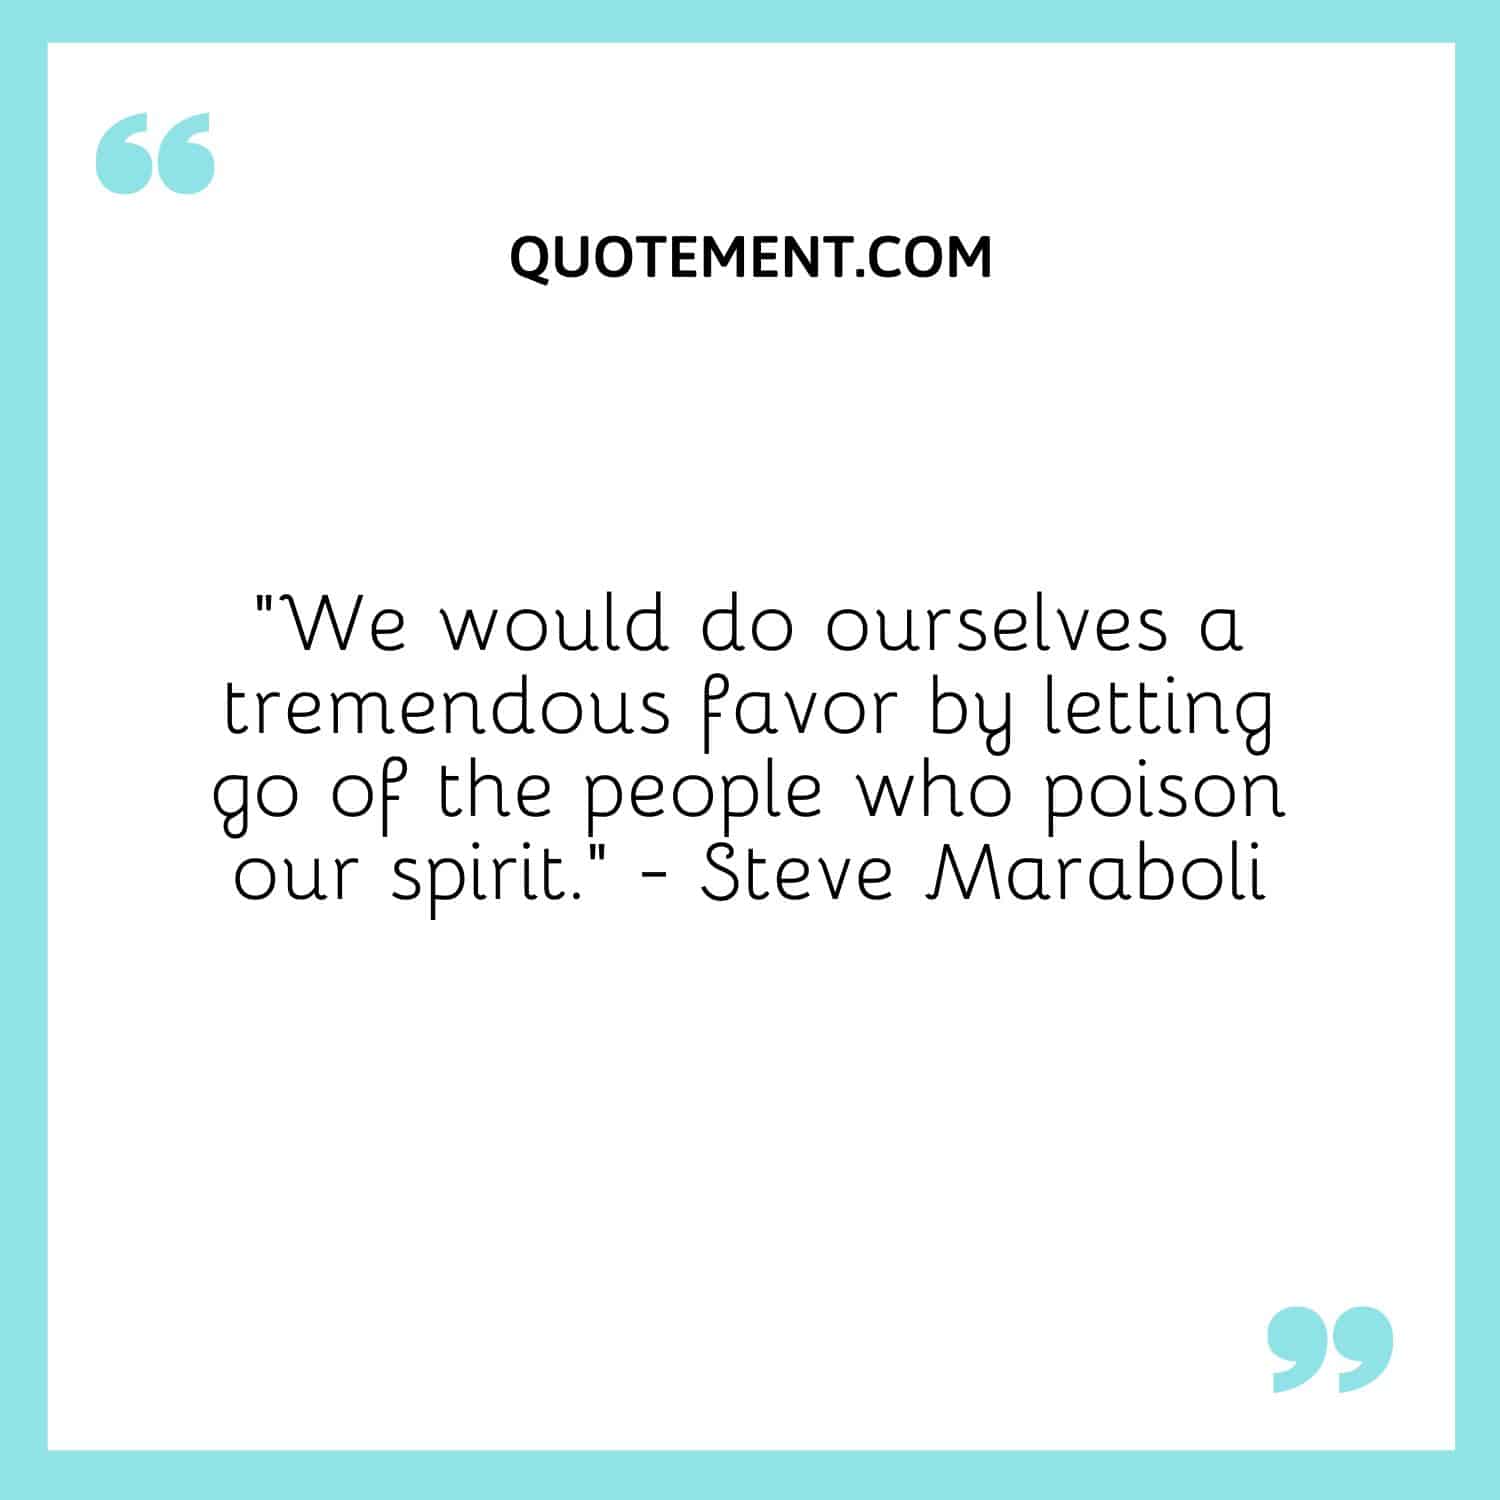 “We would do ourselves a tremendous favor by letting go of the people who poison our spirit.” - Steve Maraboli